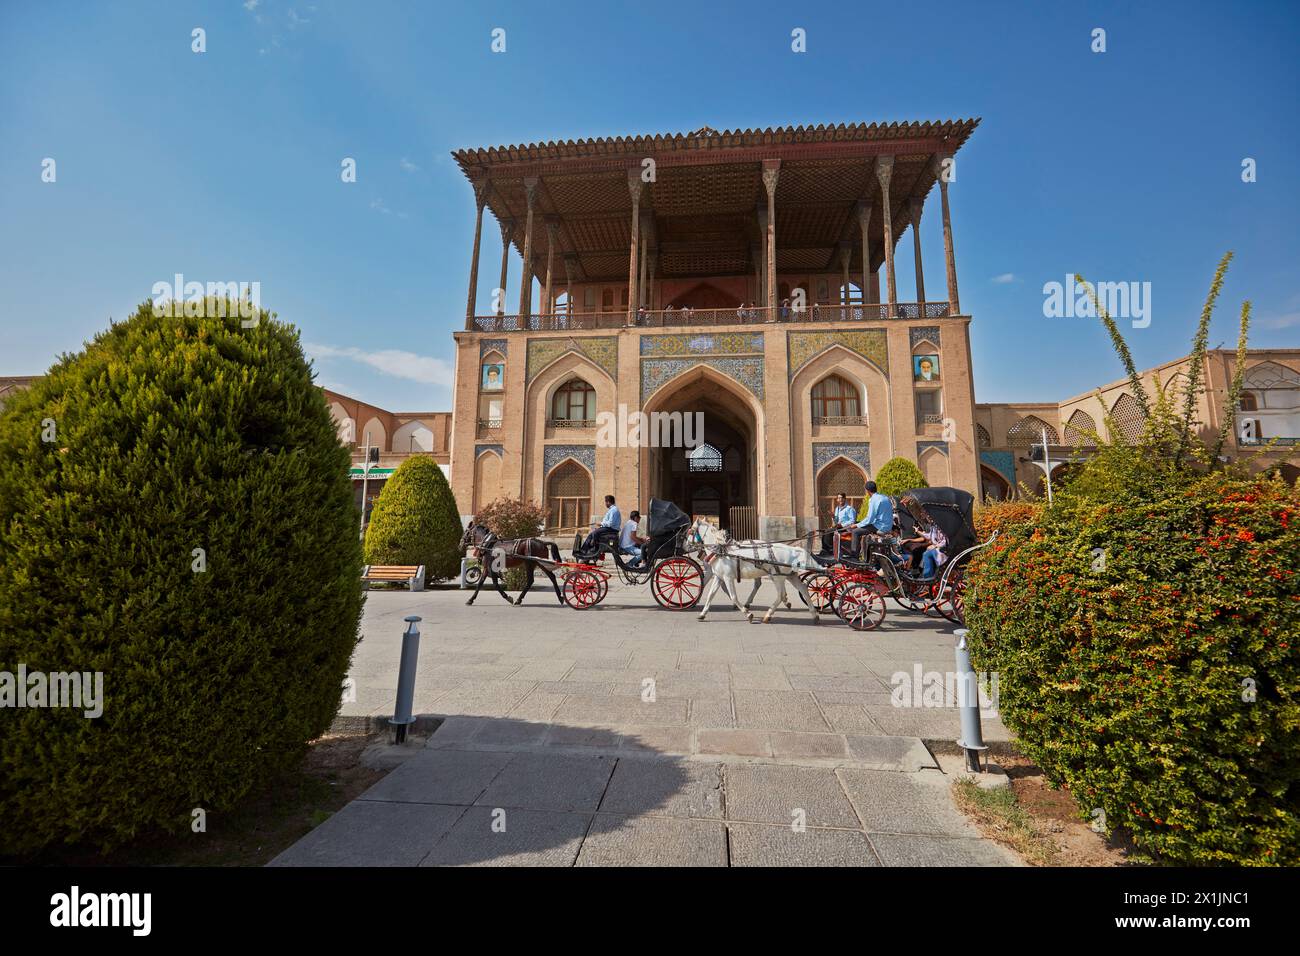 Horse drawn carriages pass by the Ali Qapu Palace in Naqsh-e Jahan Square, UNESCO World Heritage Site. Isfahan, Iran. Stock Photo